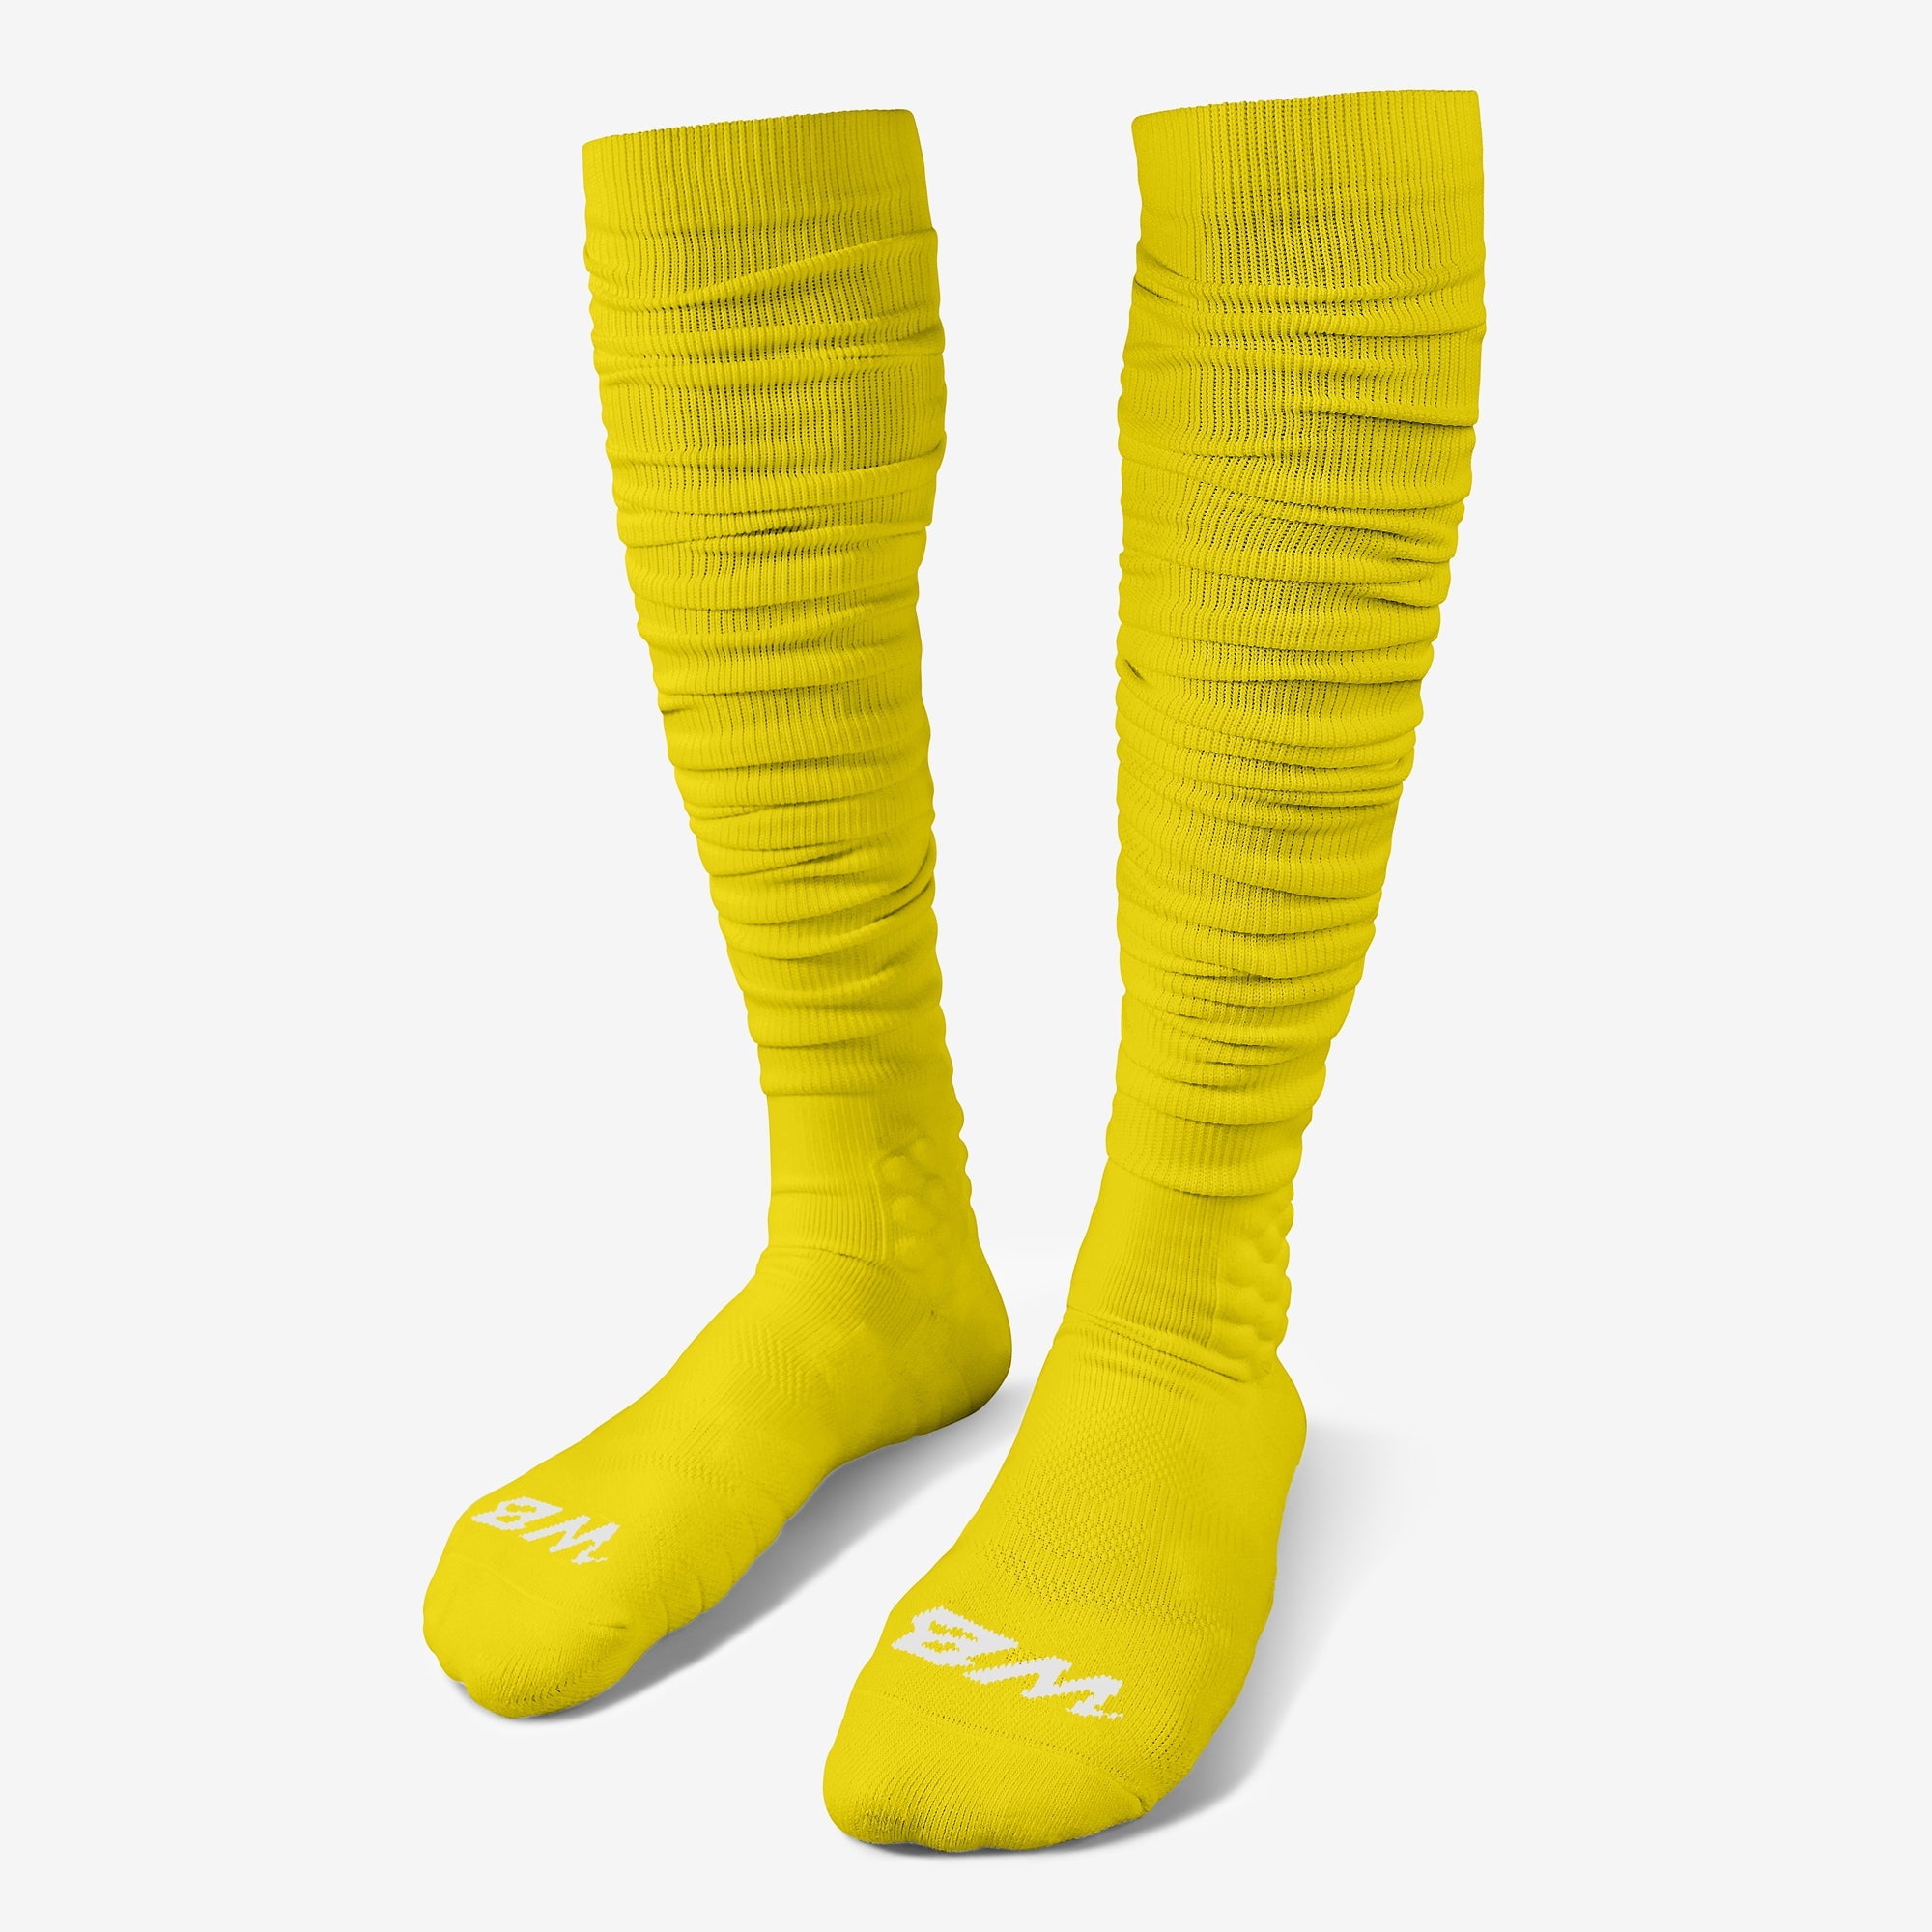 Extra Long, Over the Knee Padded Football Socks (Yellow) – We Ball Sports